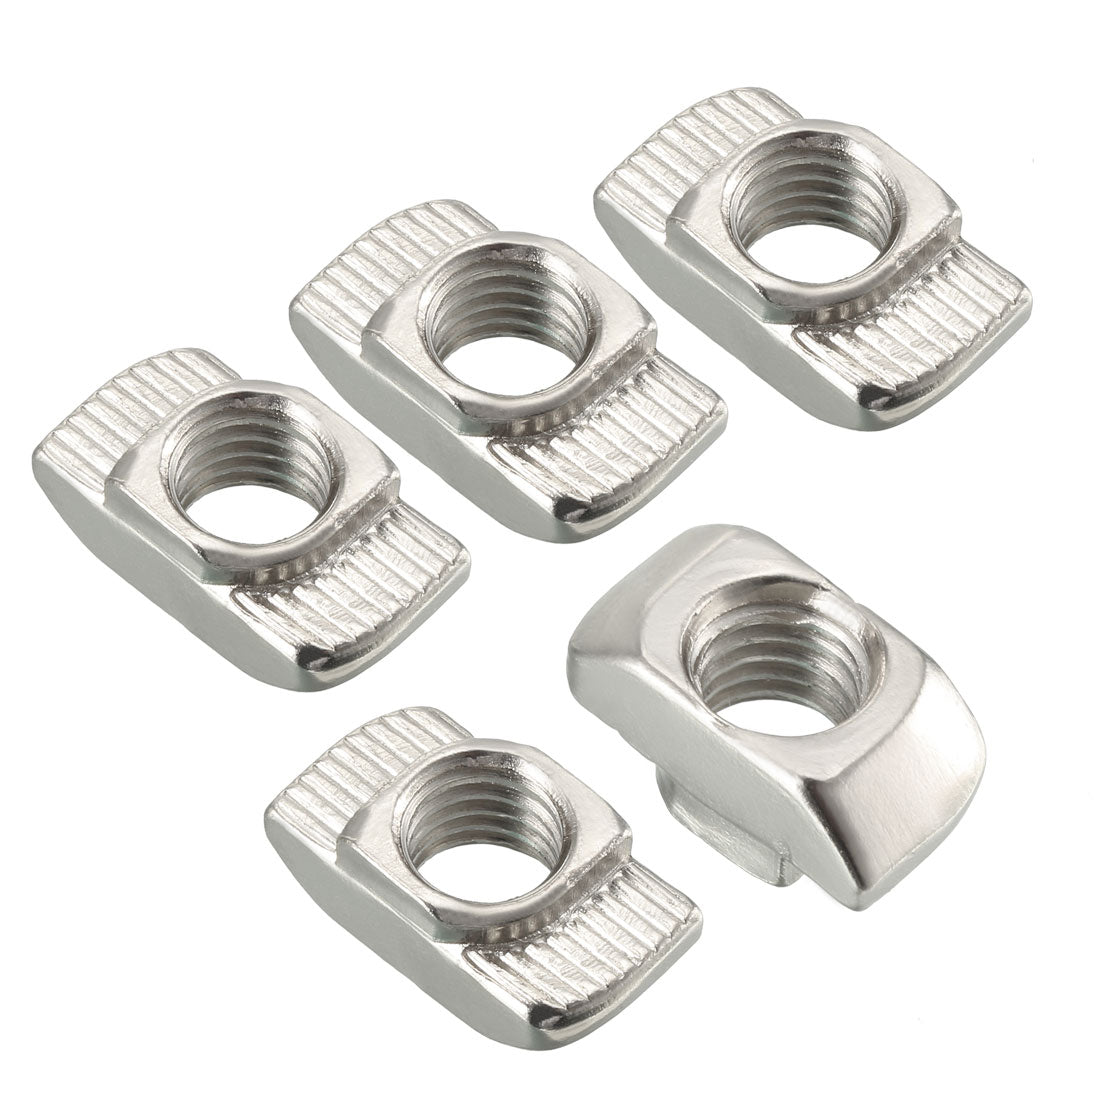 Uxcell Uxcell Sliding T Slot Nuts, M6 Thread for 4545 Series Aluminum Extrusion Profile 10pcs